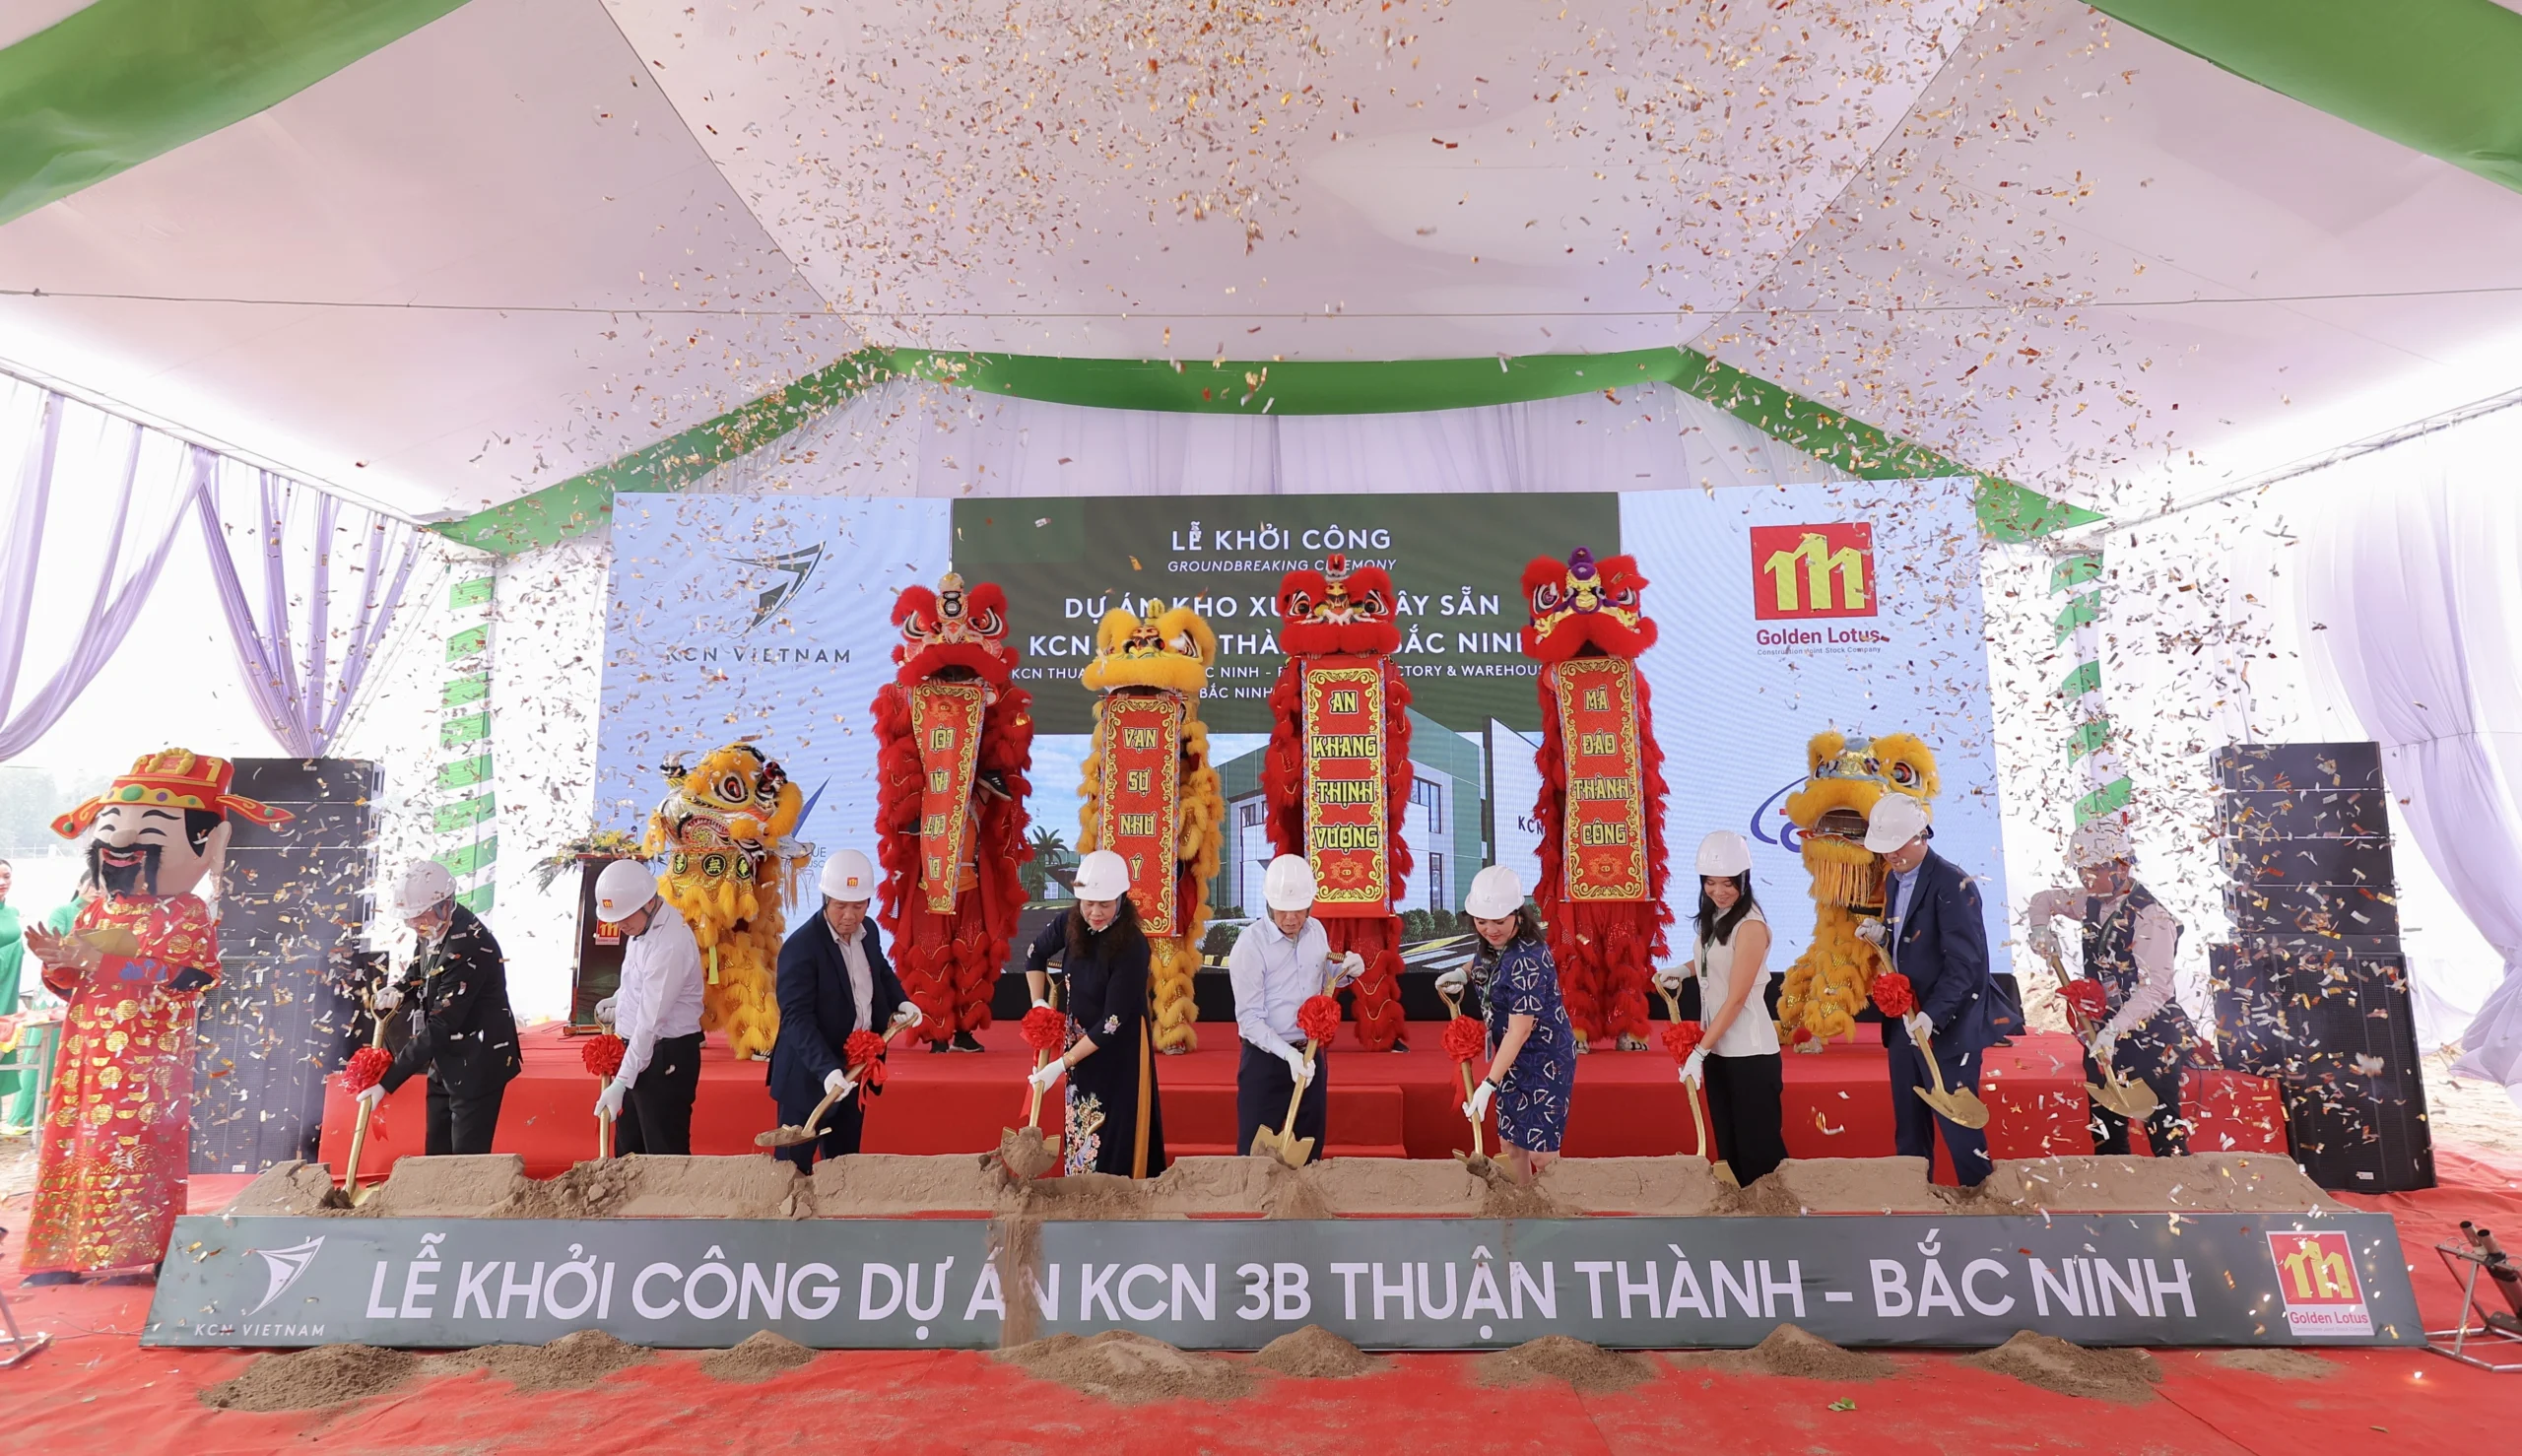 Bac Ninh has another 14ha industrial park project near Ring Road 4